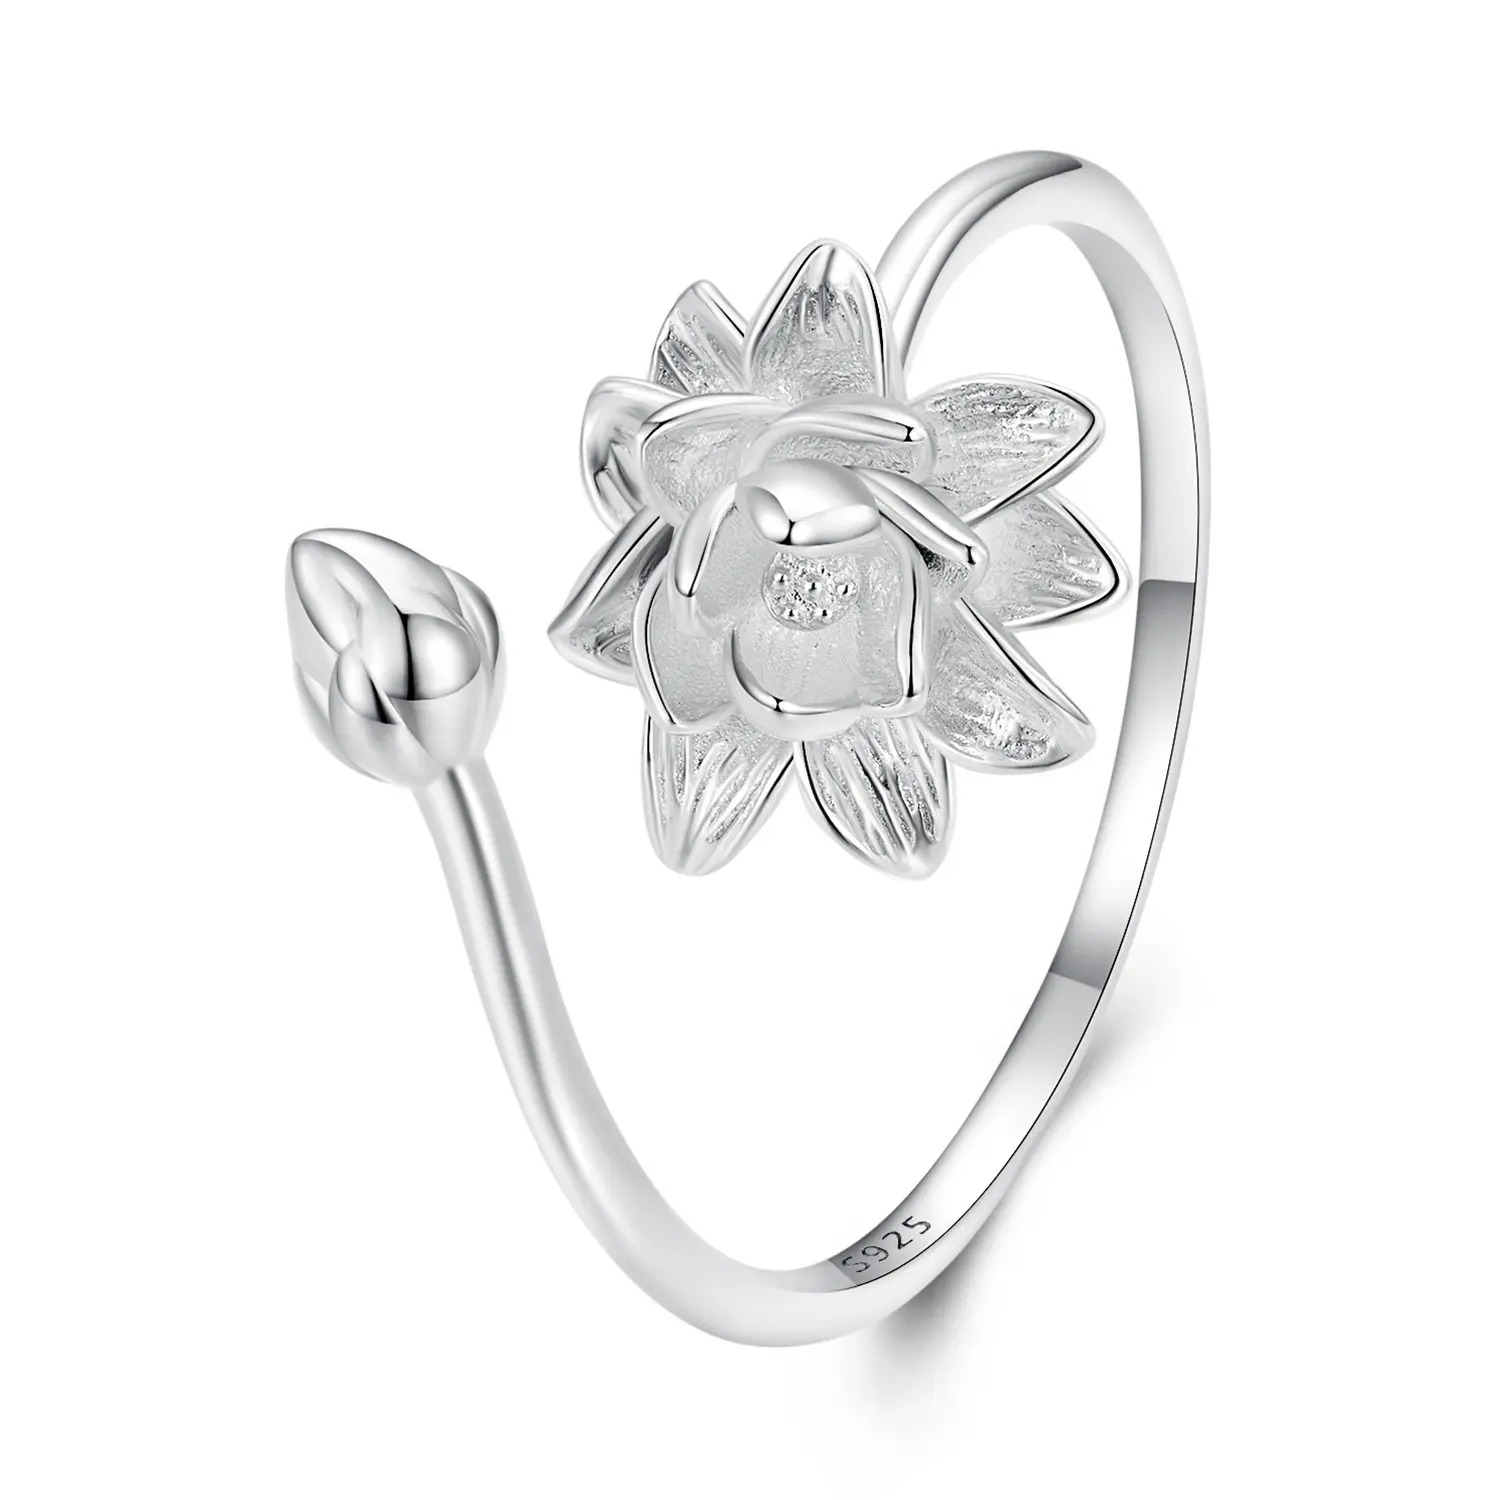 925 Silver Ring High Quality Fine Jewelry Argento Anello da Donna Lotus Flower Open Ring for Girls